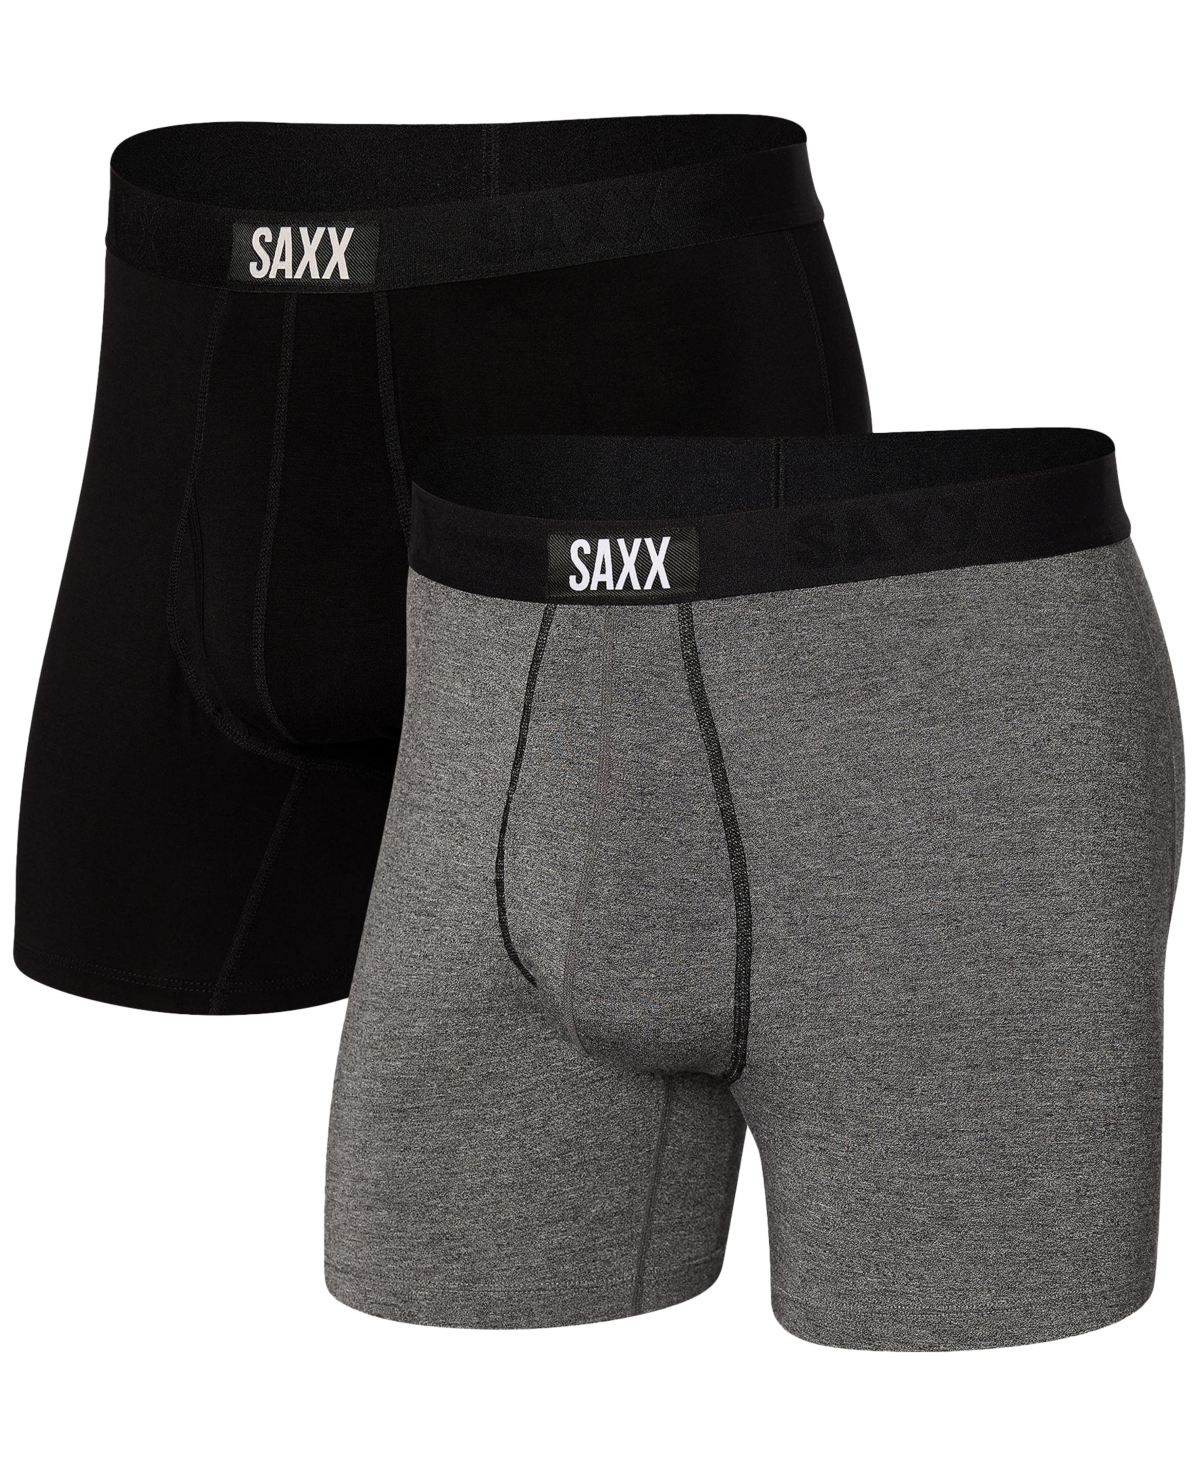 Saxx Men's Ultra Super Soft Relaxed Fit Boxer Briefs – 2pk In Black,grey